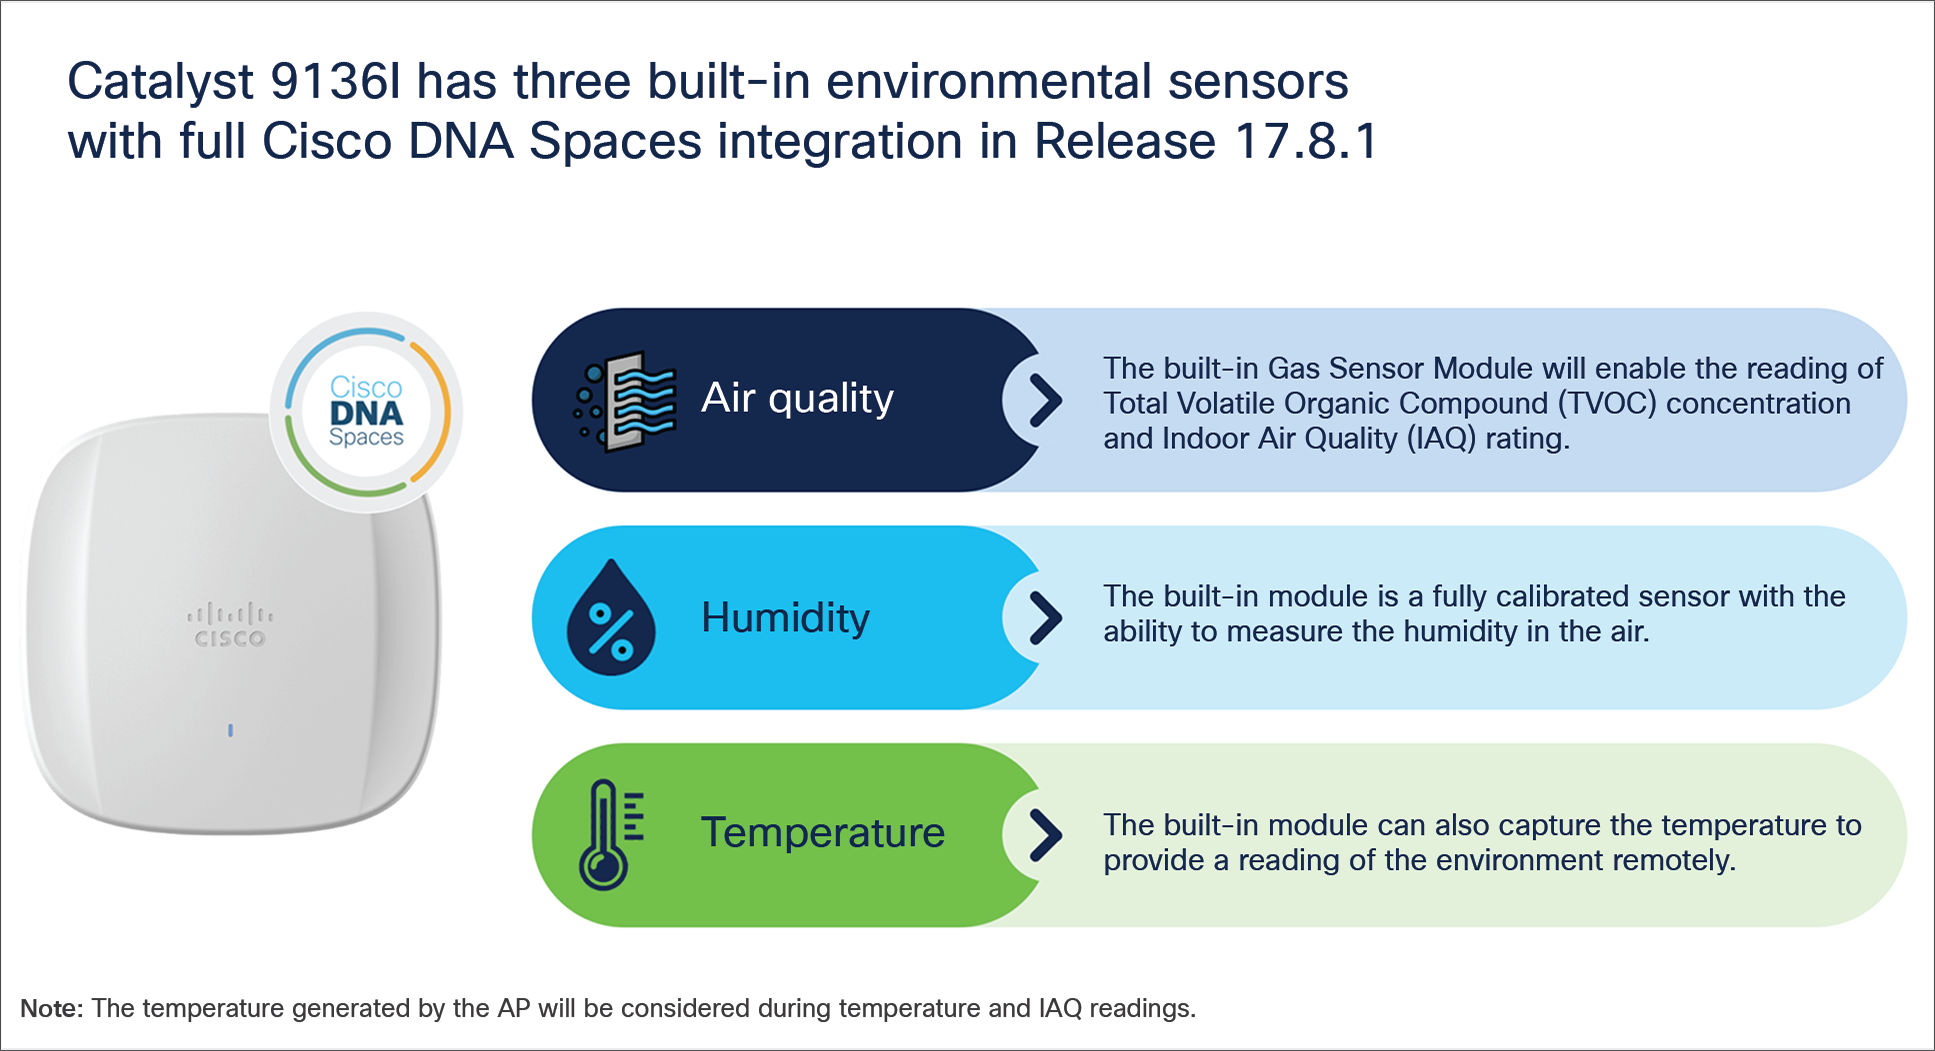 Environmental sensor overview of the Catalyst 9136I